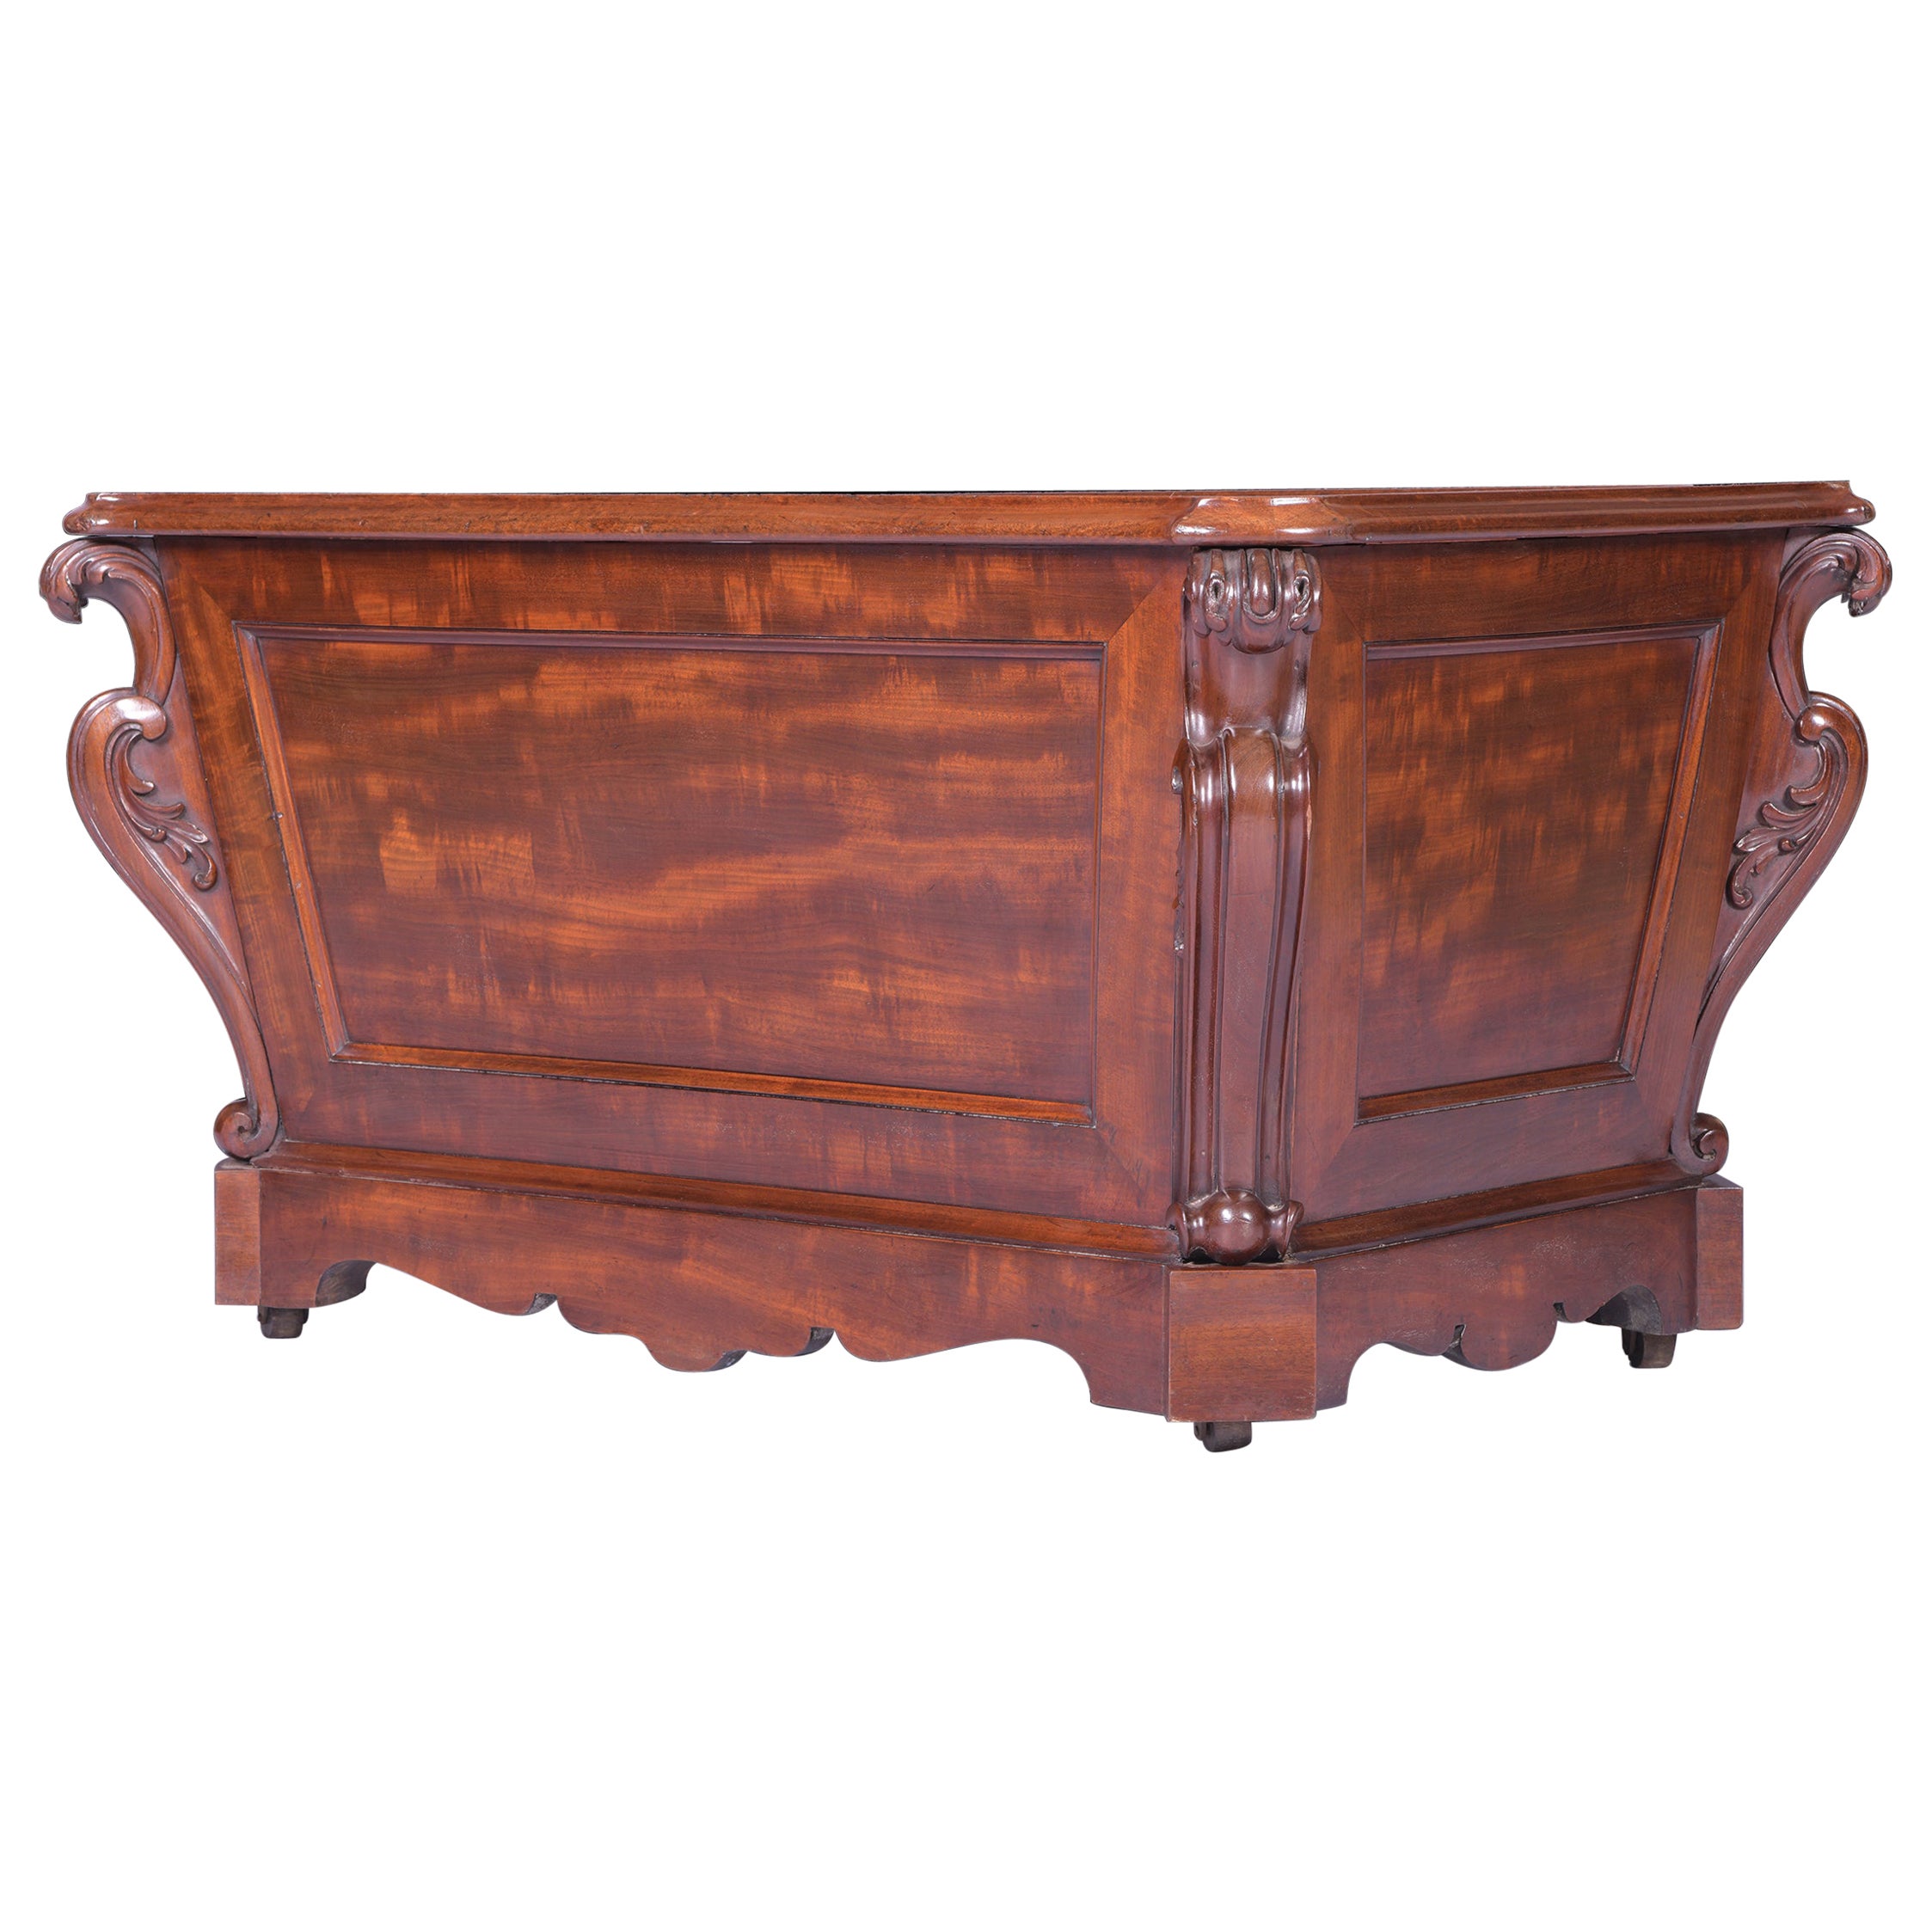 19th Century English Regency Mahogany Open Cellarette Attributed to Gillows